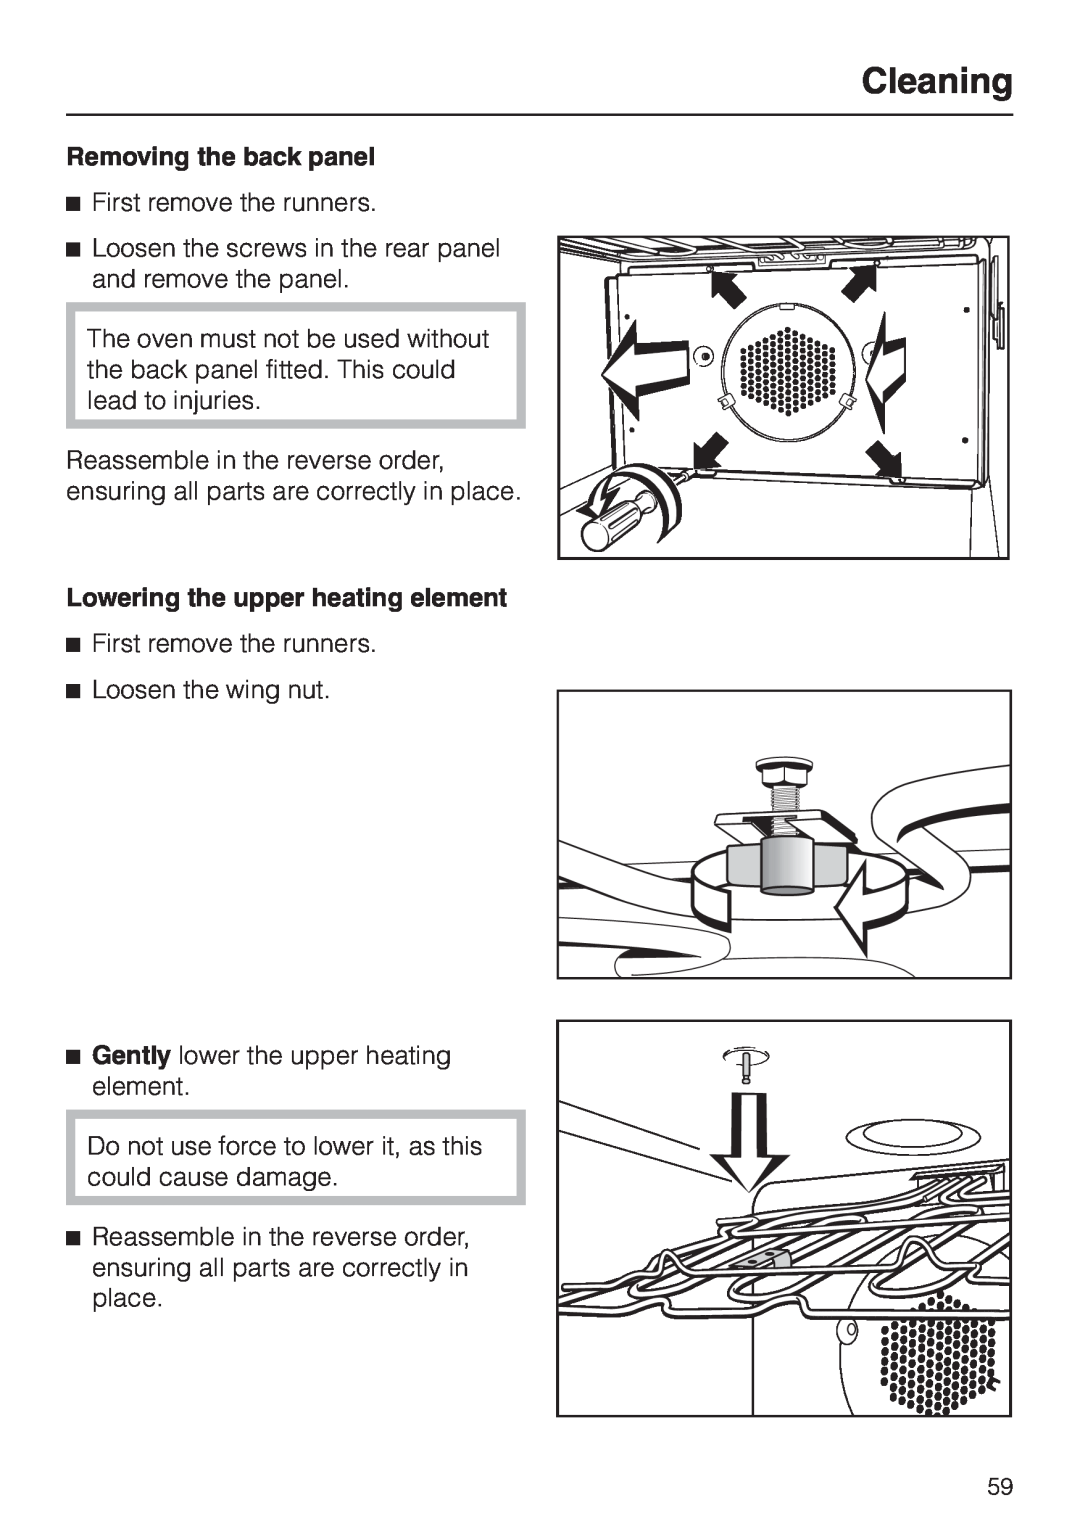 Miele H4780B installation instructions Cleaning, Removing the back panel, Lowering the upper heating element 